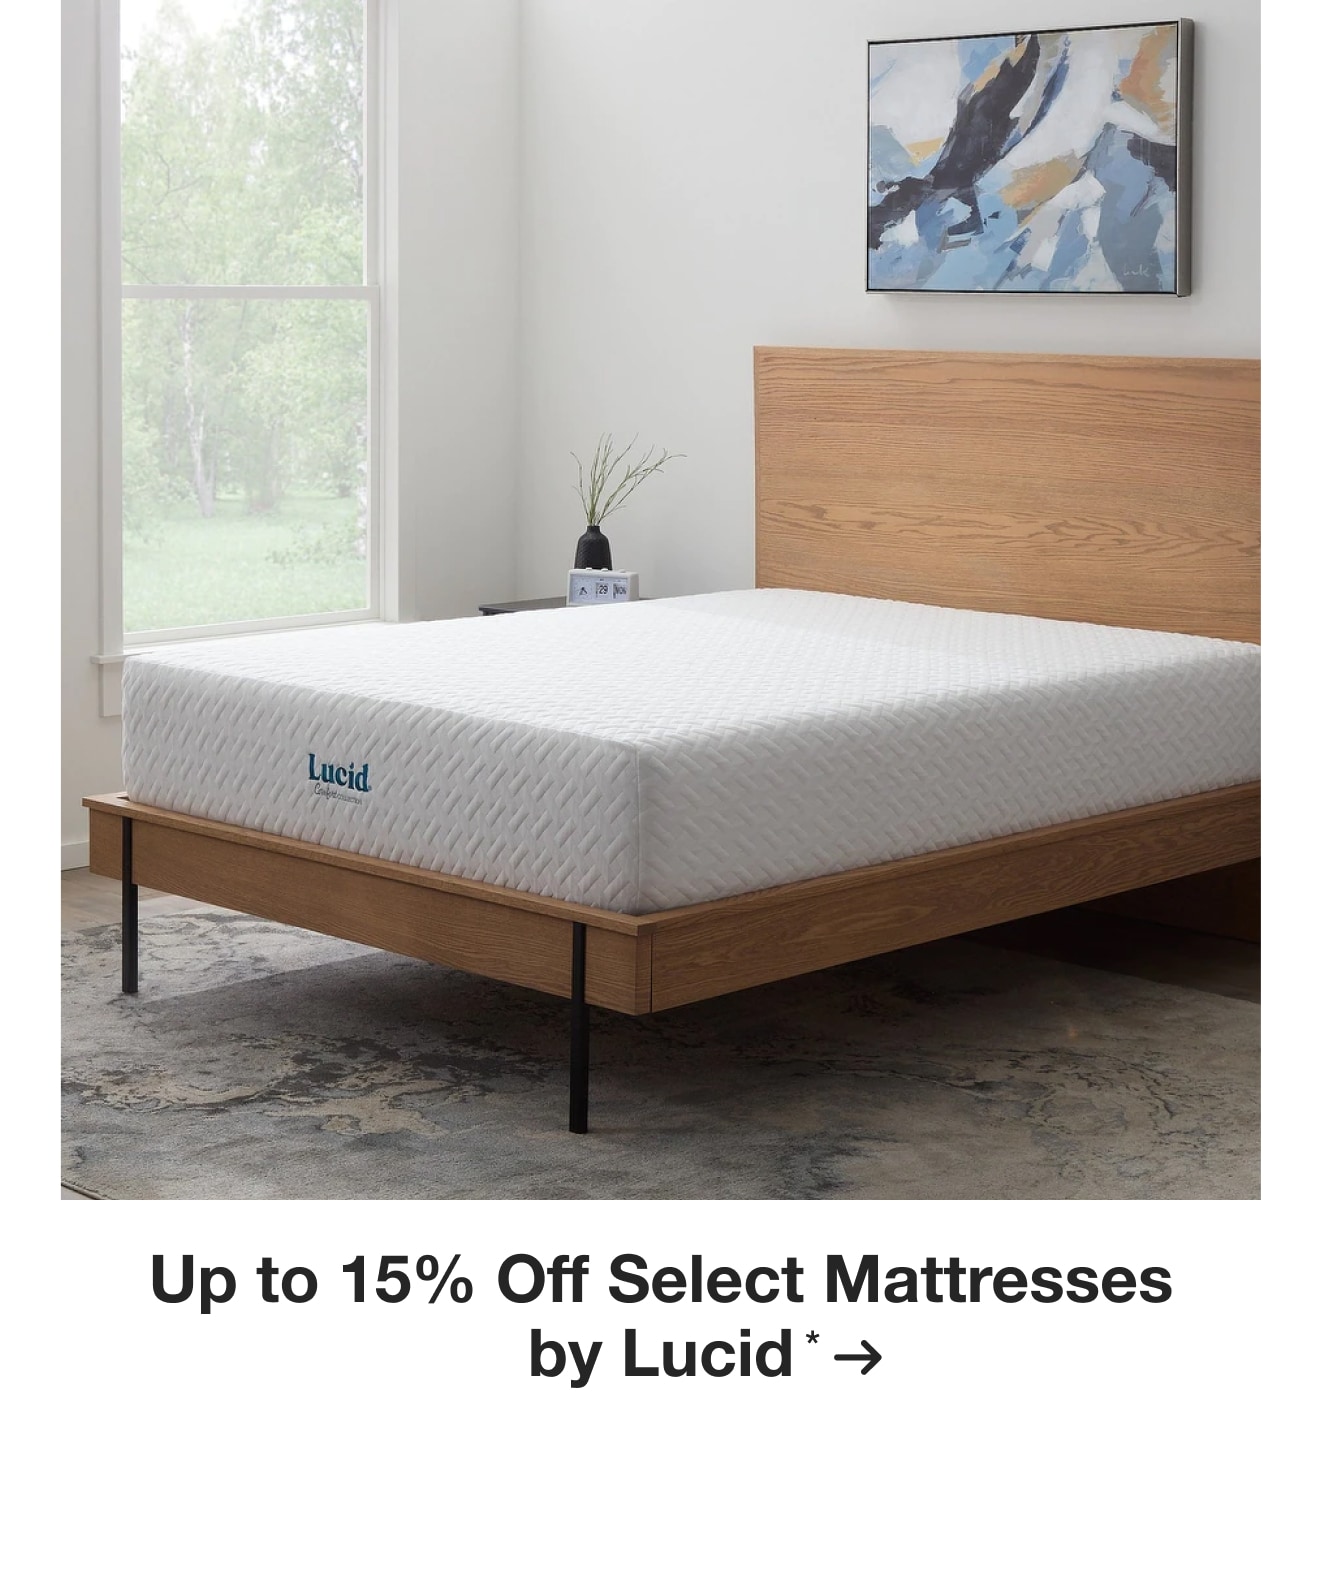 Up to 15% Off Select Mattresses by Lucid*